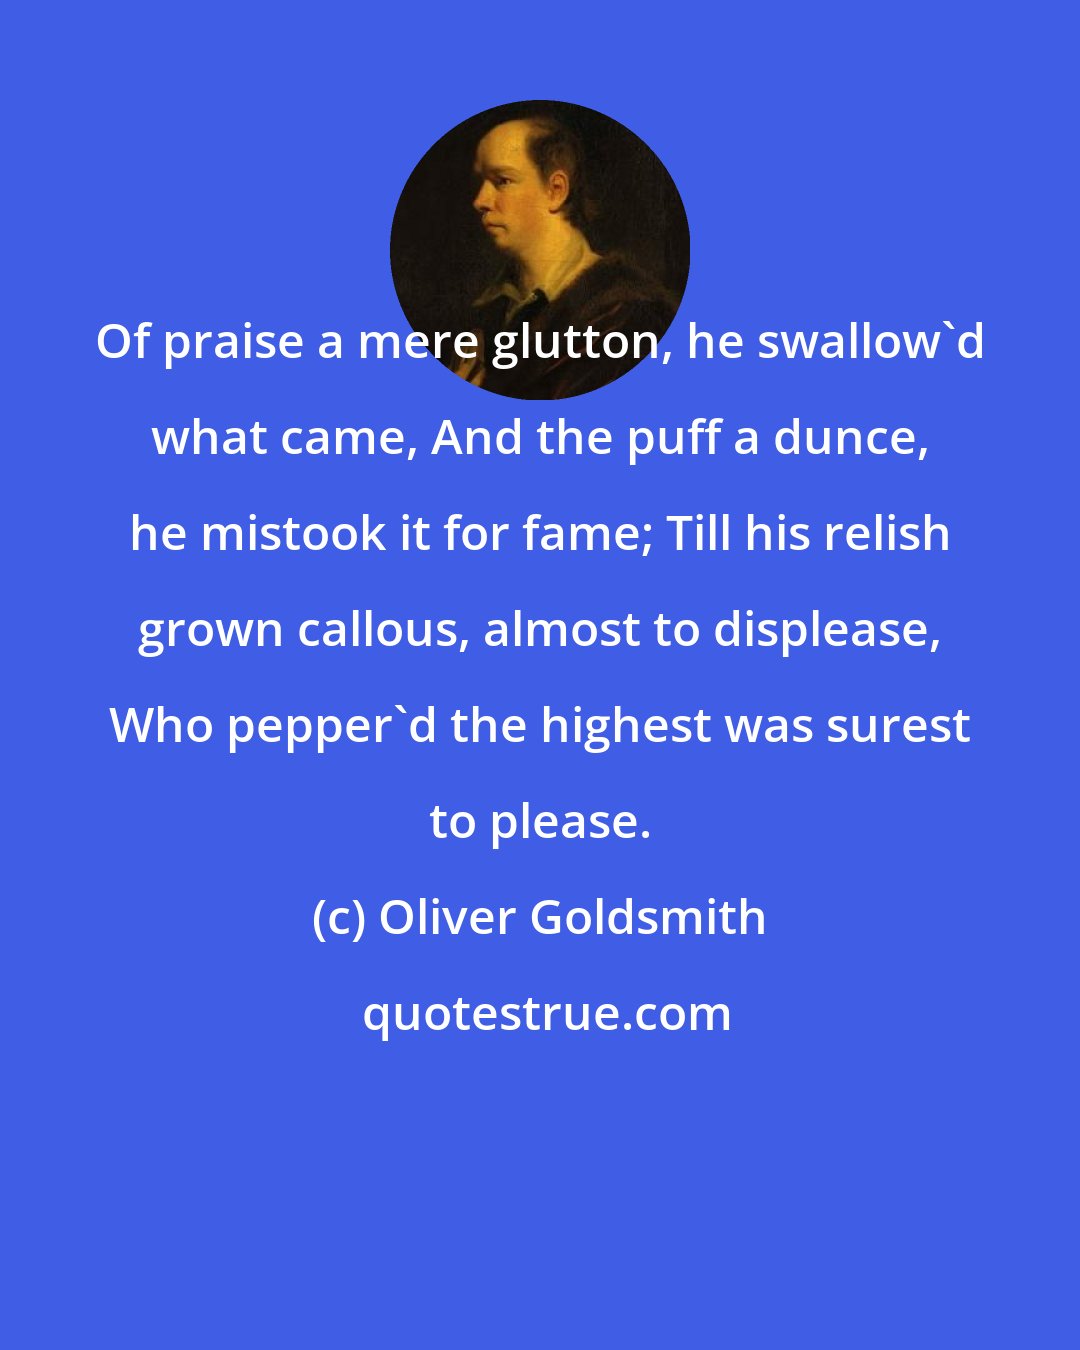 Oliver Goldsmith: Of praise a mere glutton, he swallow'd what came, And the puff a dunce, he mistook it for fame; Till his relish grown callous, almost to displease, Who pepper'd the highest was surest to please.